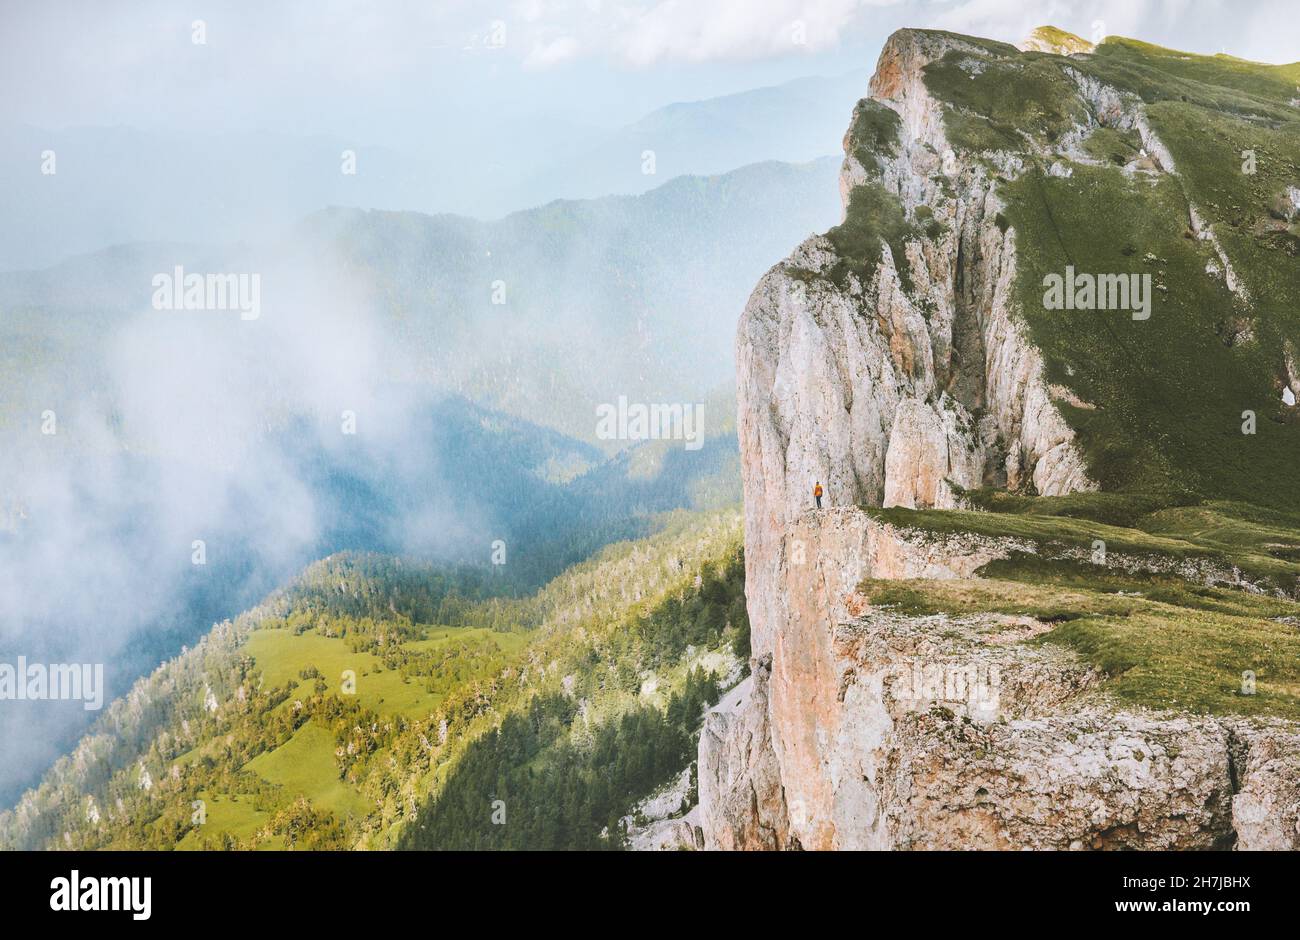 Mountain climbing travel adventure vacations outdoor man standing on cliff edge rocks and clouds landscape Stock Photo